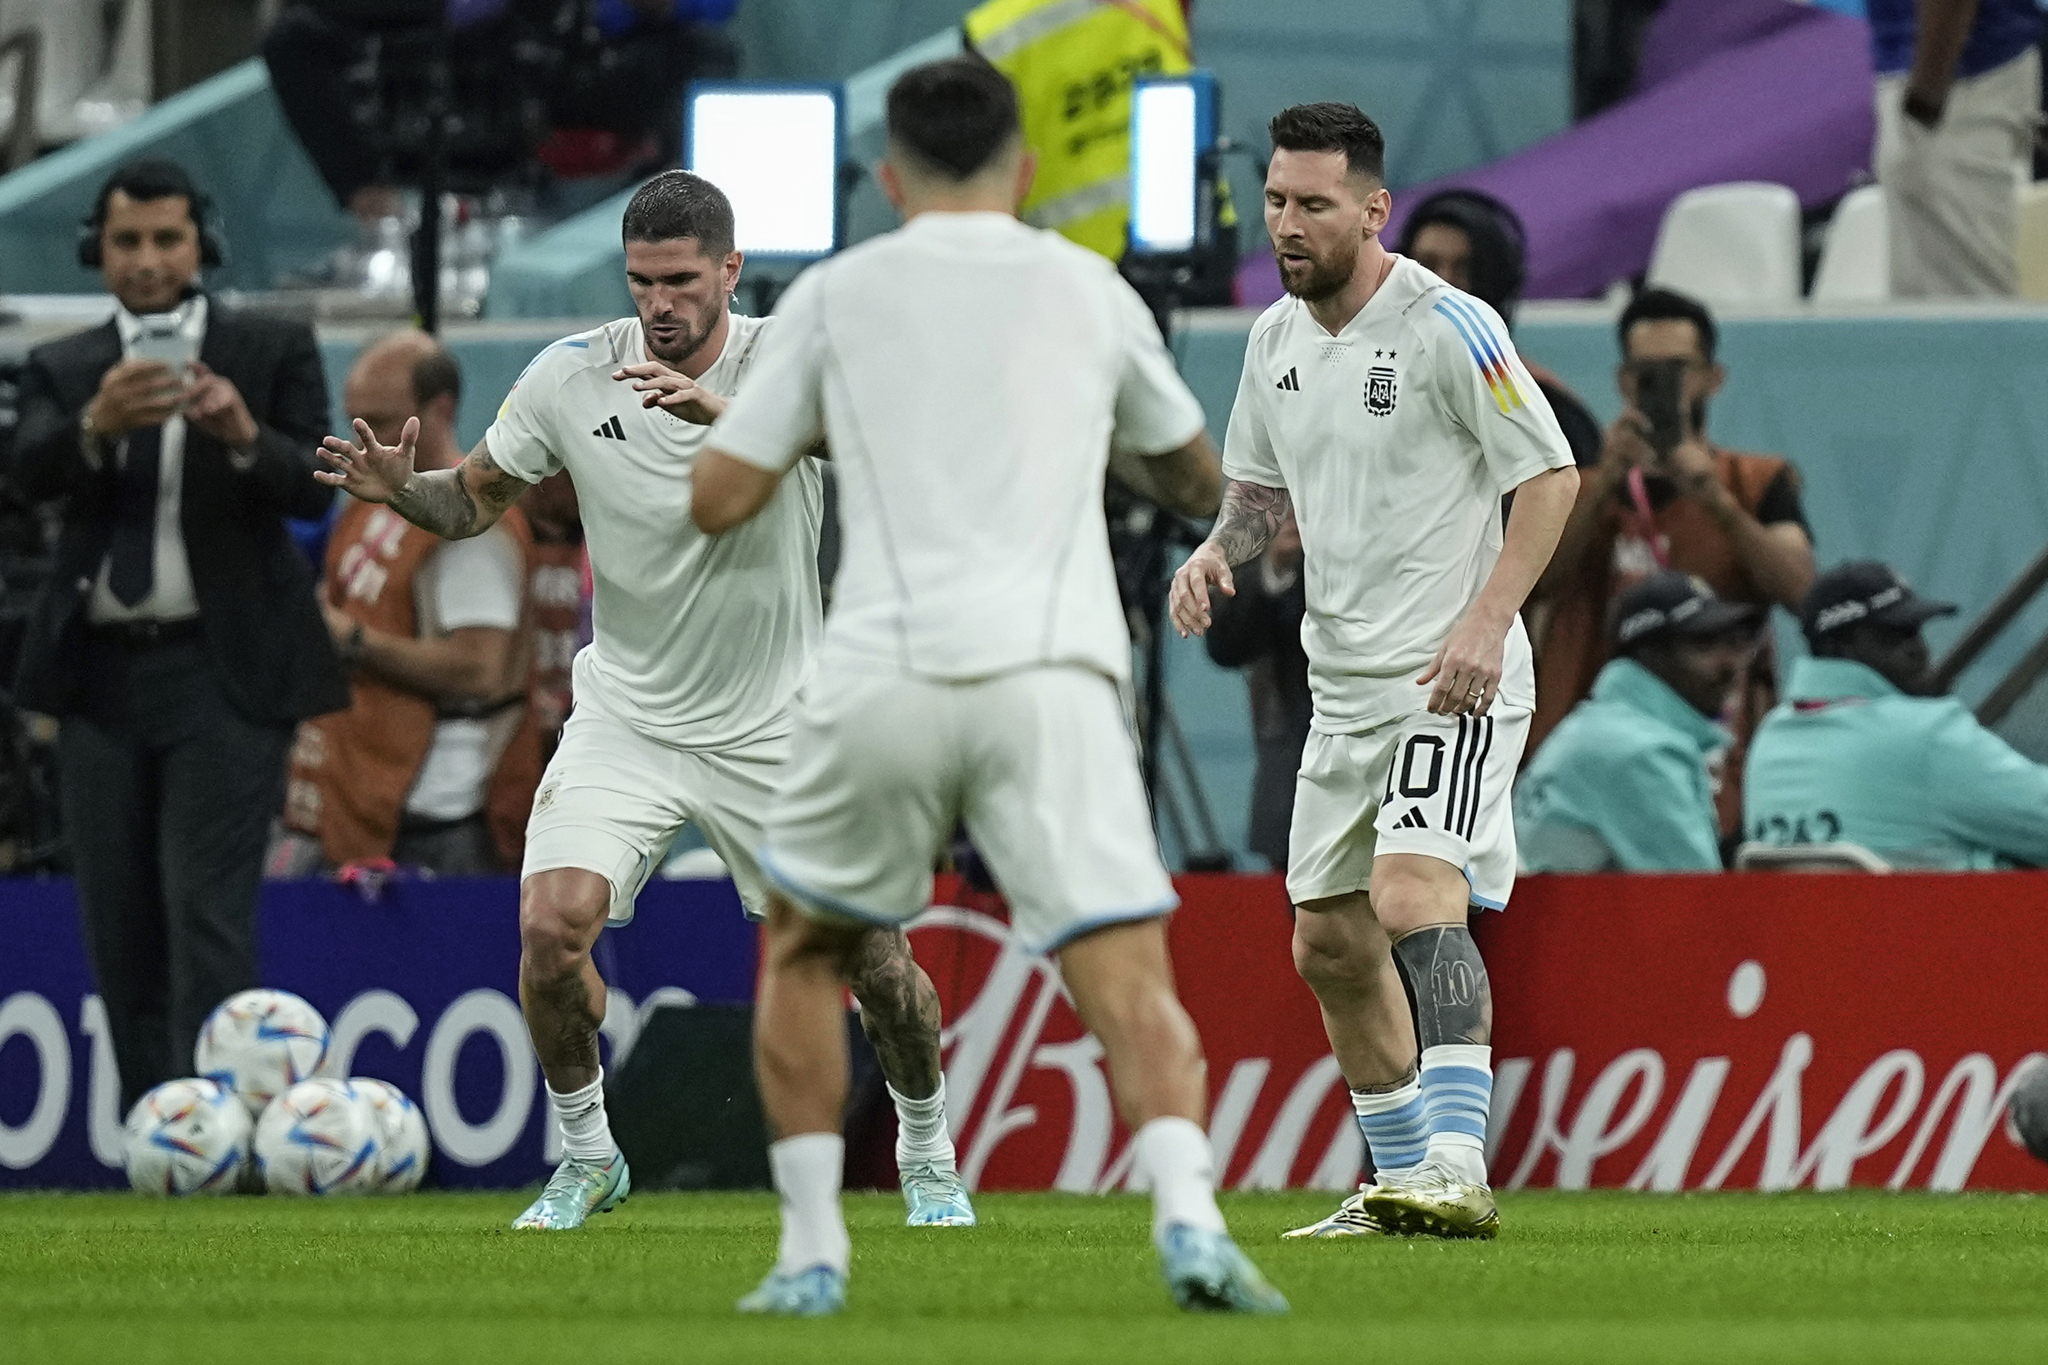  lt;HIT gt;Argentina lt;/HIT gt;'s Lionel Messi, right, warms up with teammates prior the start of the World Cup quarterfinal soccer match between the Netherlands and  lt;HIT gt;Argentina lt;/HIT gt;, at the Lusail Stadium in Lusail, Qatar, Friday, Dec. 9, 2022. (AP Photo/Jorge Saenz)